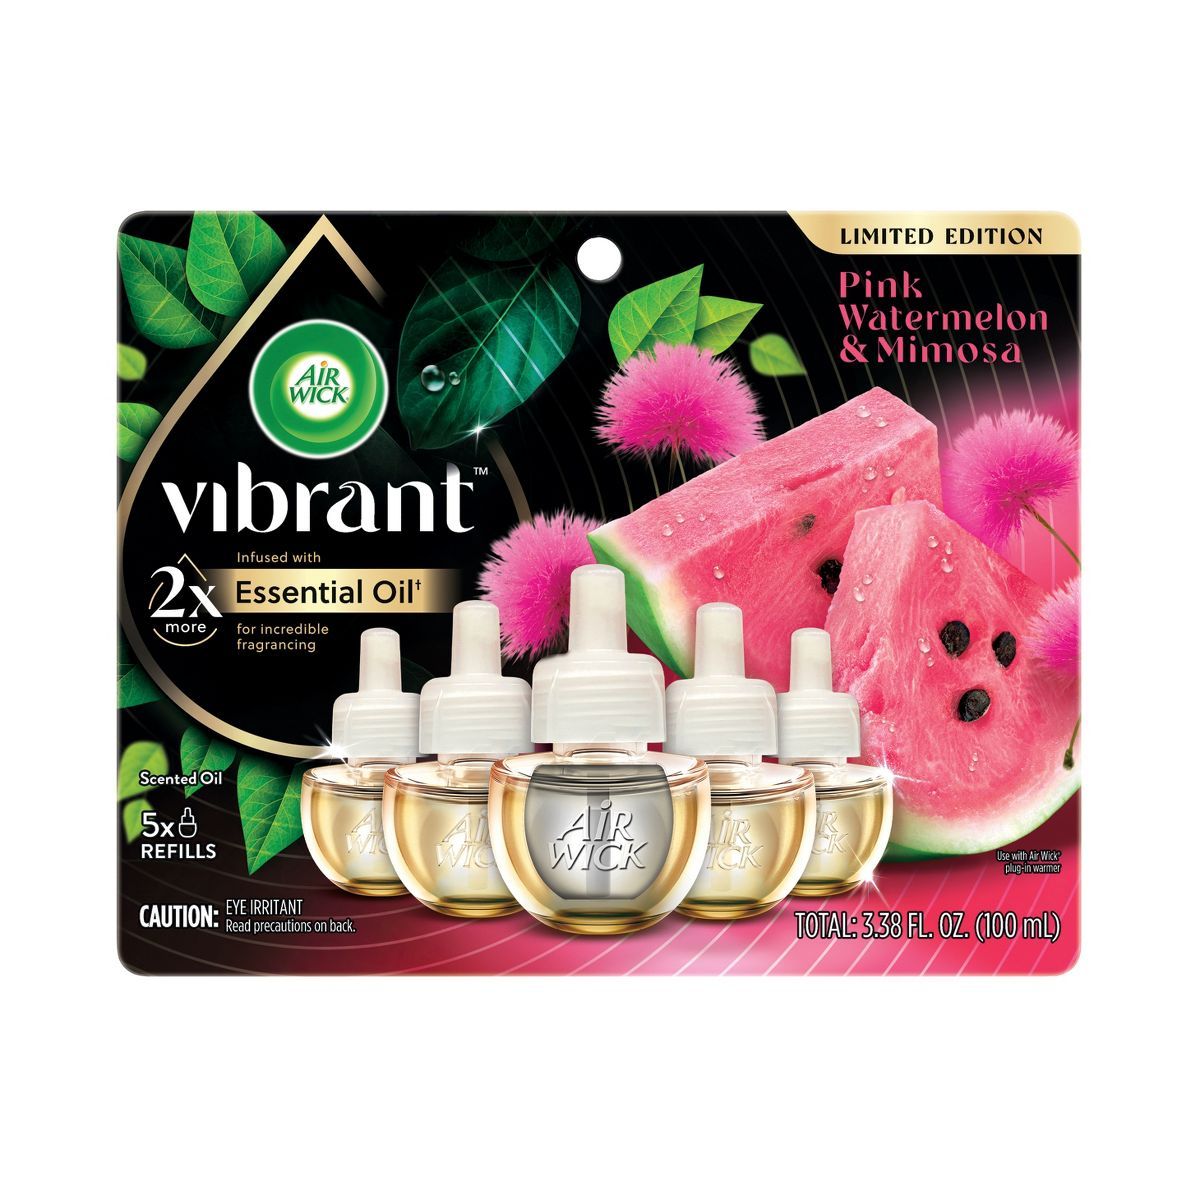 Air Wick Scented Oil Vibrant Refill Air Freshener Pink Watermelon & Mimosa - 5ct | Target